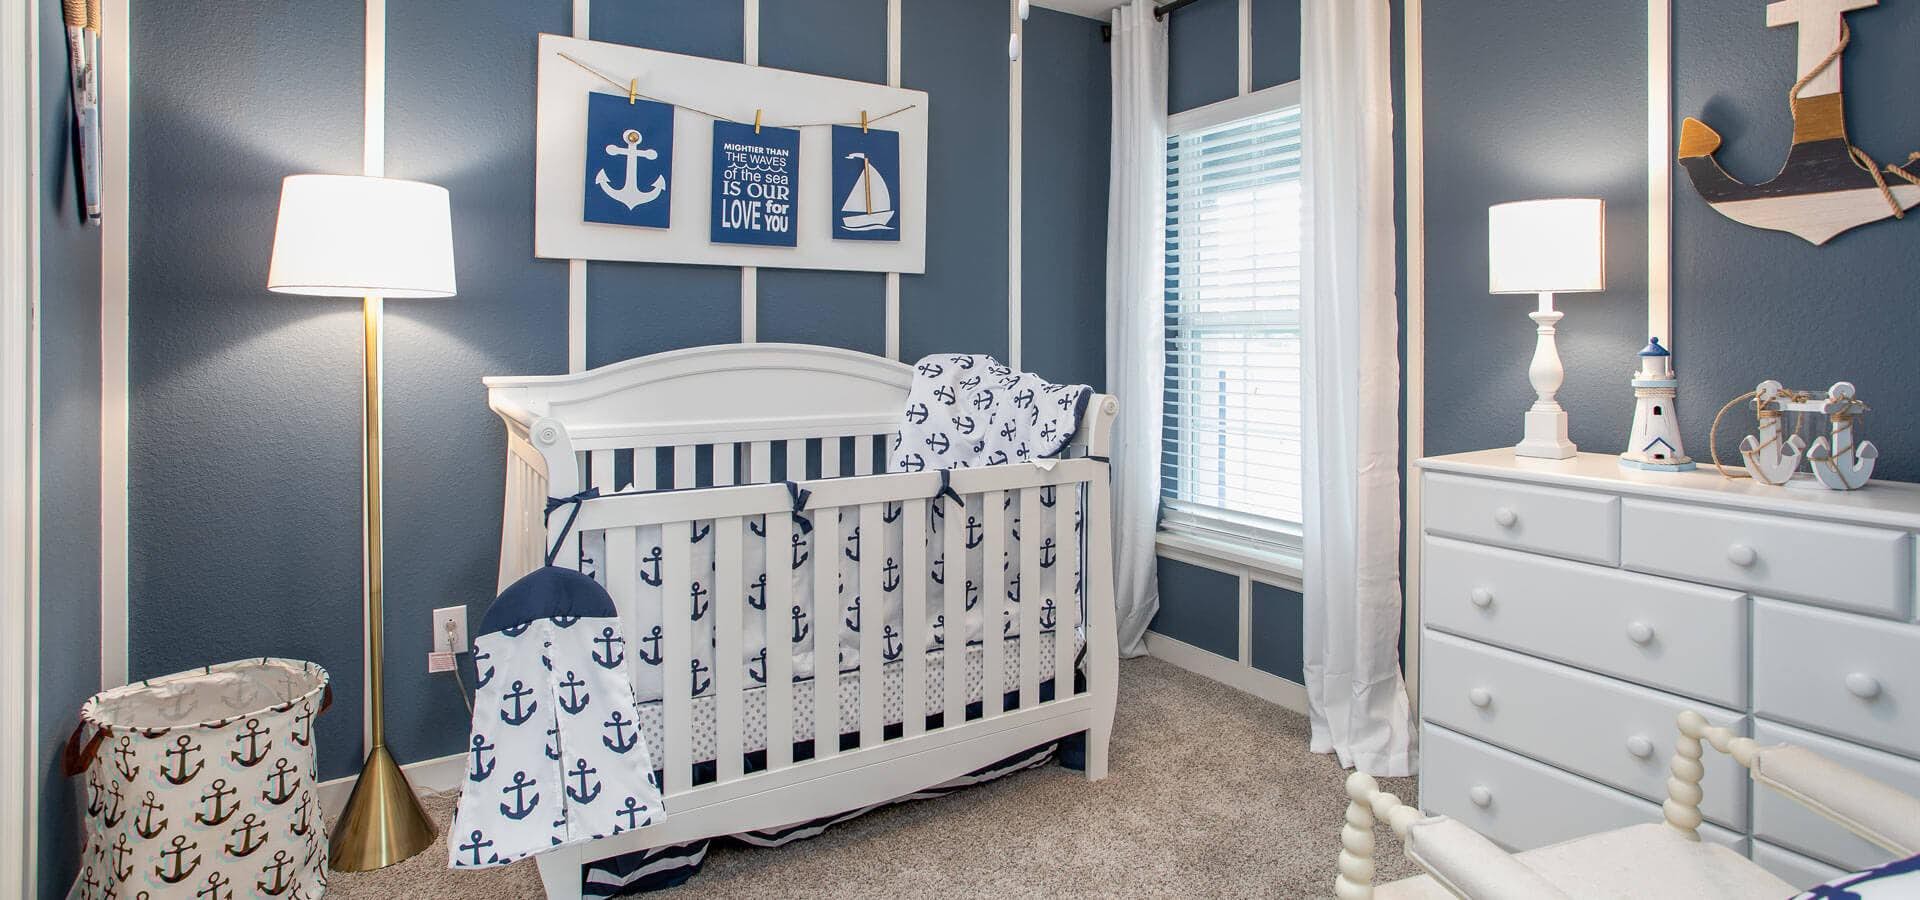 Children's room at Ridgewood community by Highland Homes